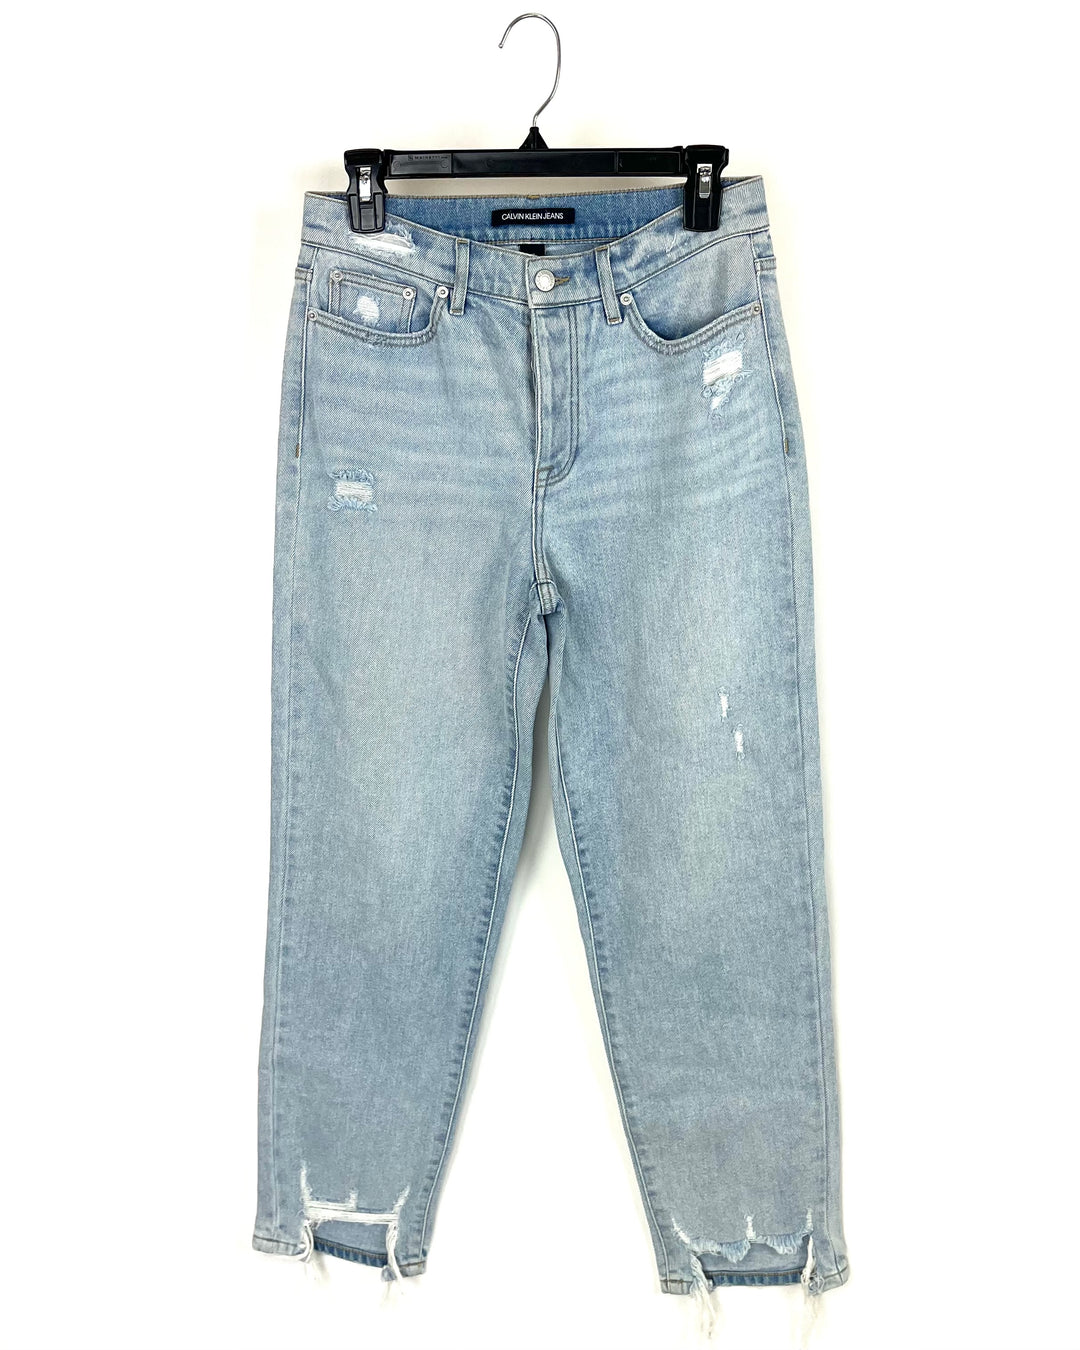 Light Wash Distressed High Rise Mom Jeans - Size 28